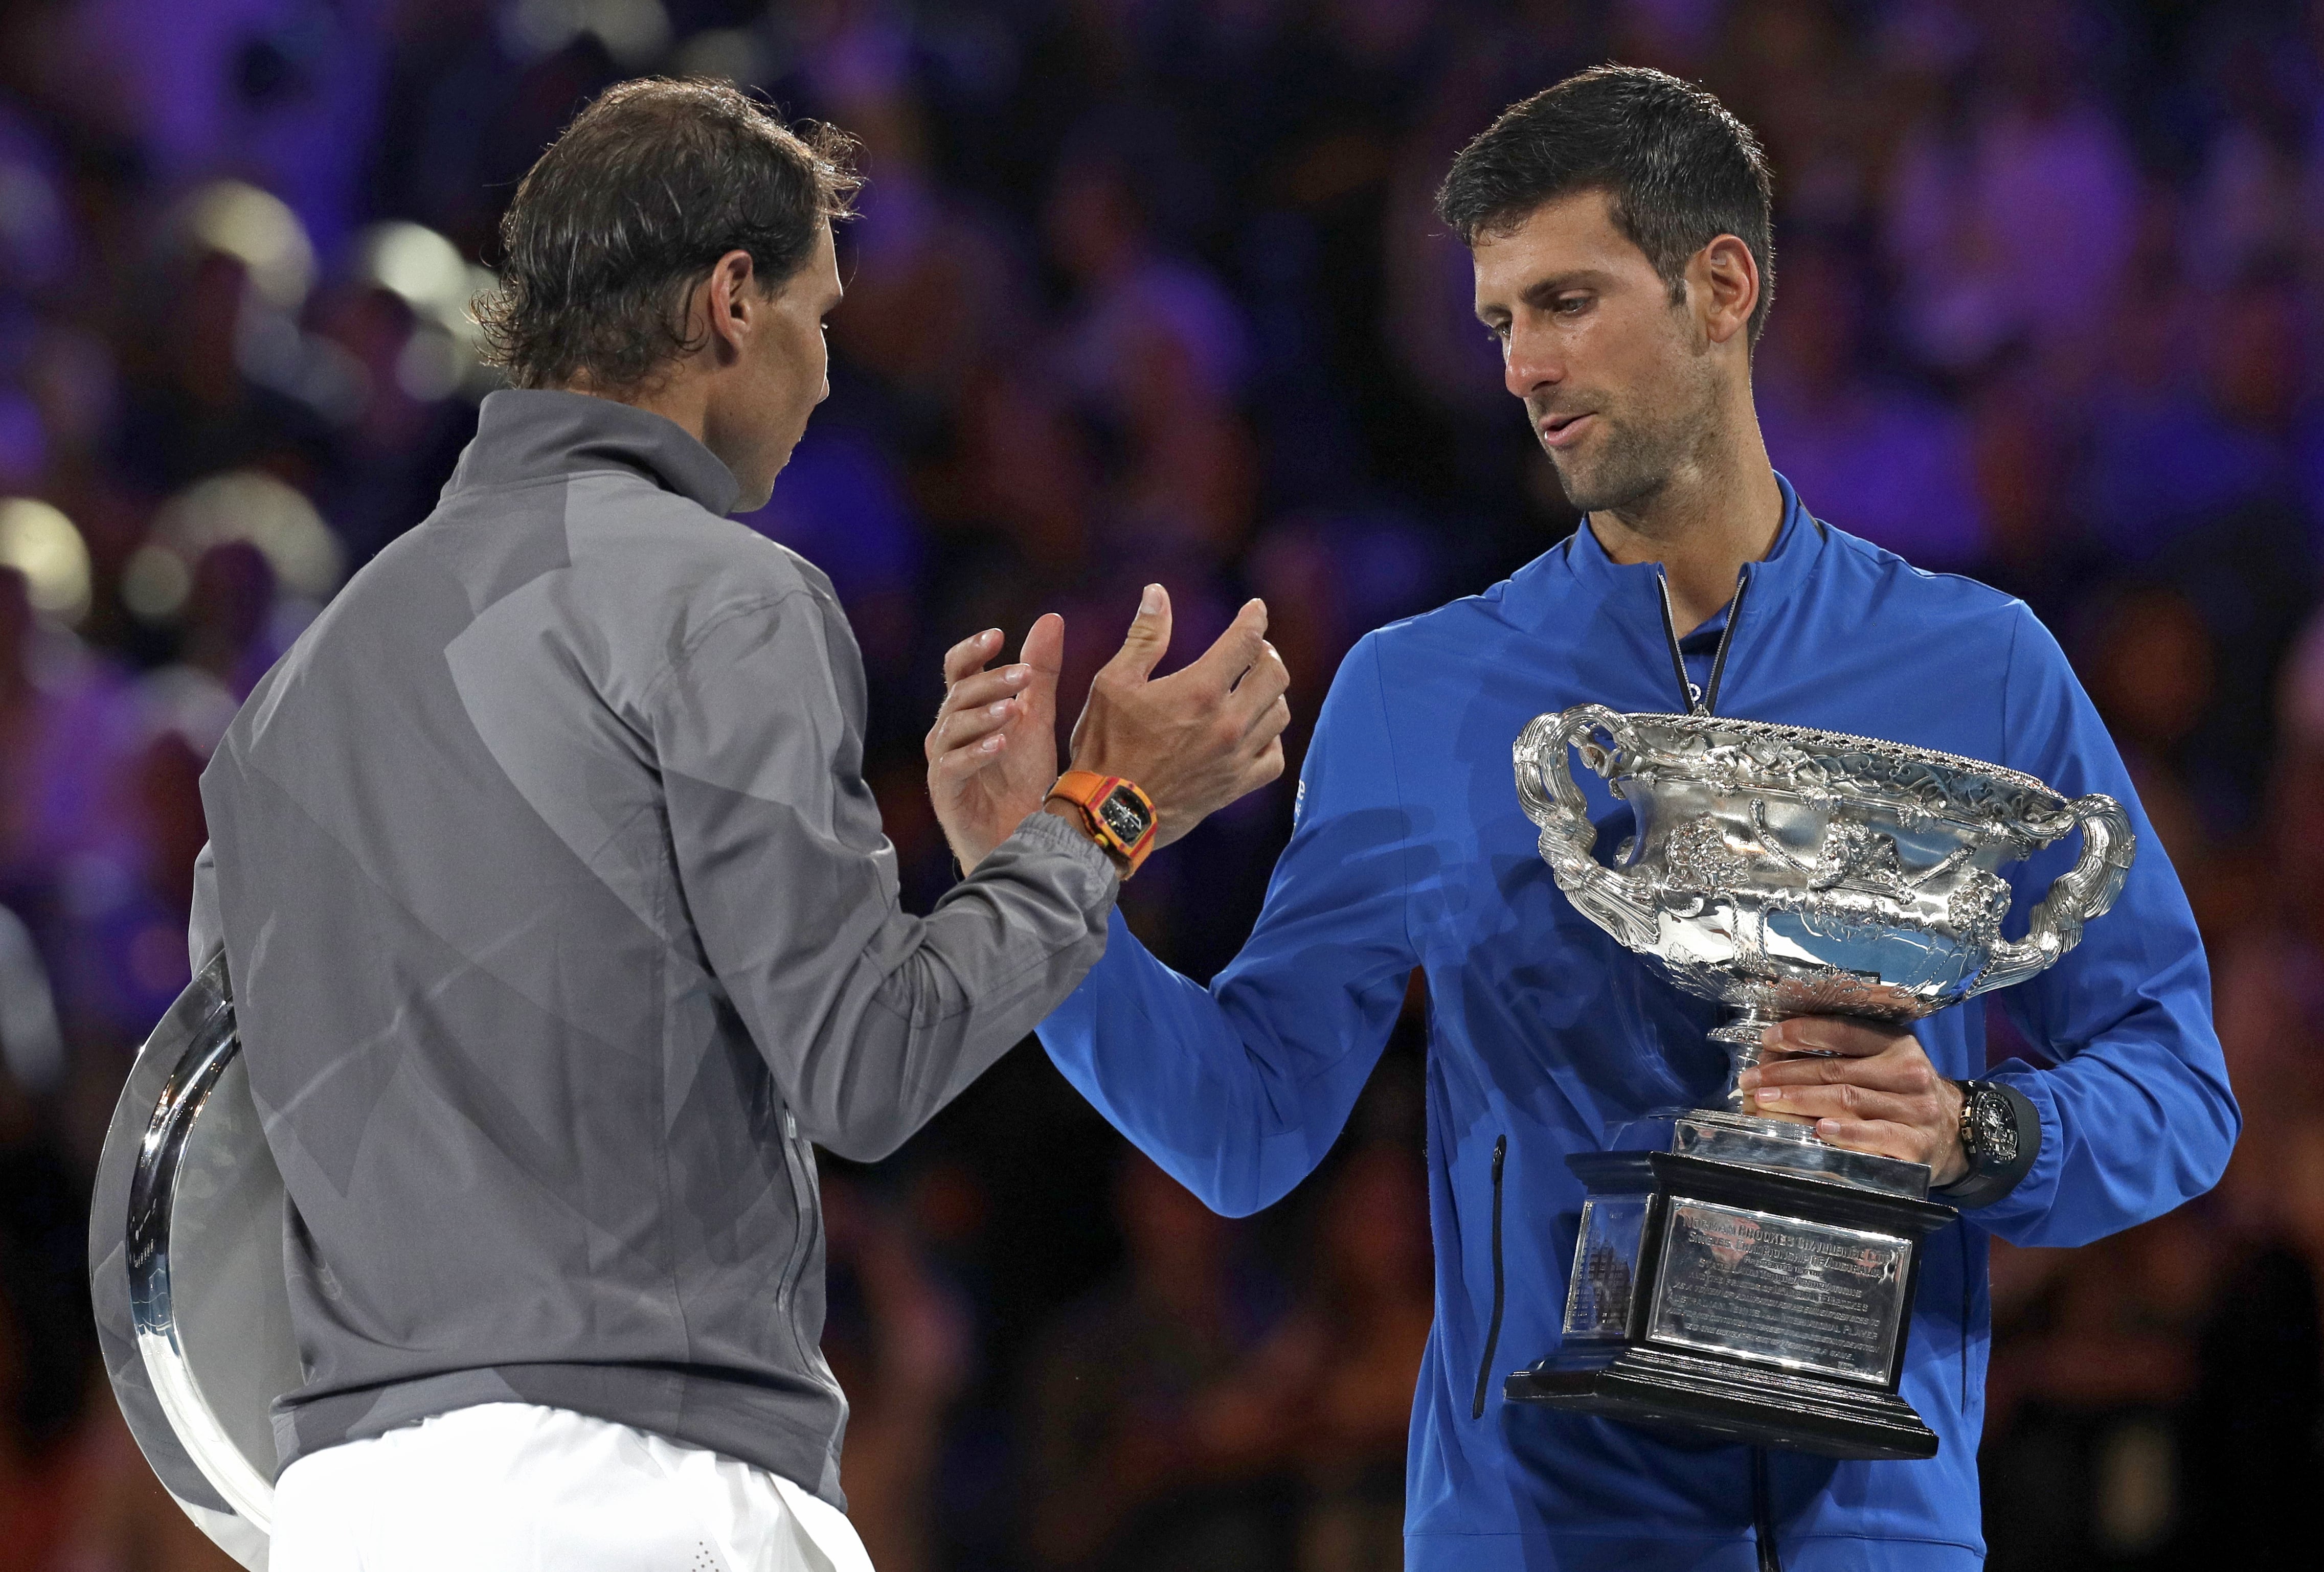 Serbia's Novak Djokovic, right, shakes hands with Spain's Rafael Nadal on the podium after winning the men's singles final at the Australian Open tennis championships in Melbourne, Australia, Sunday, Jan. 27, 2019.